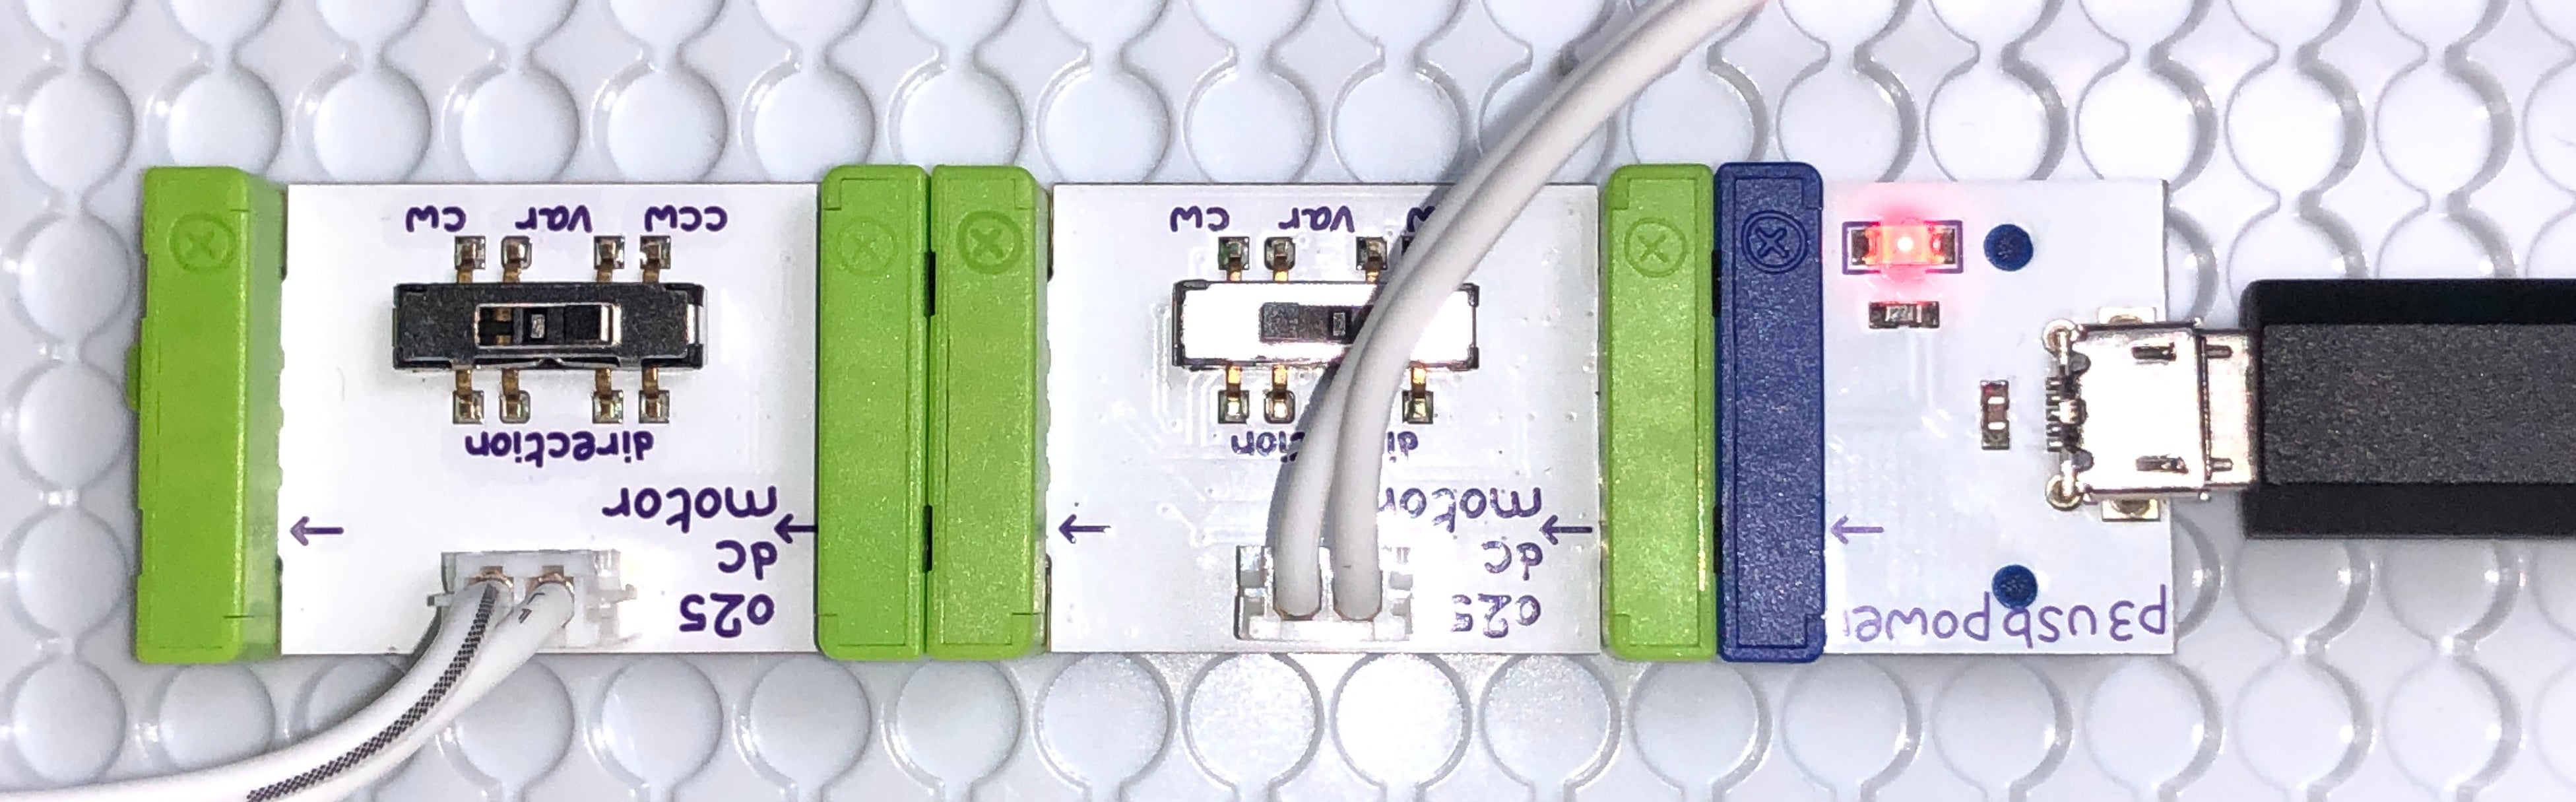 2 DC motor littleBits connected to power